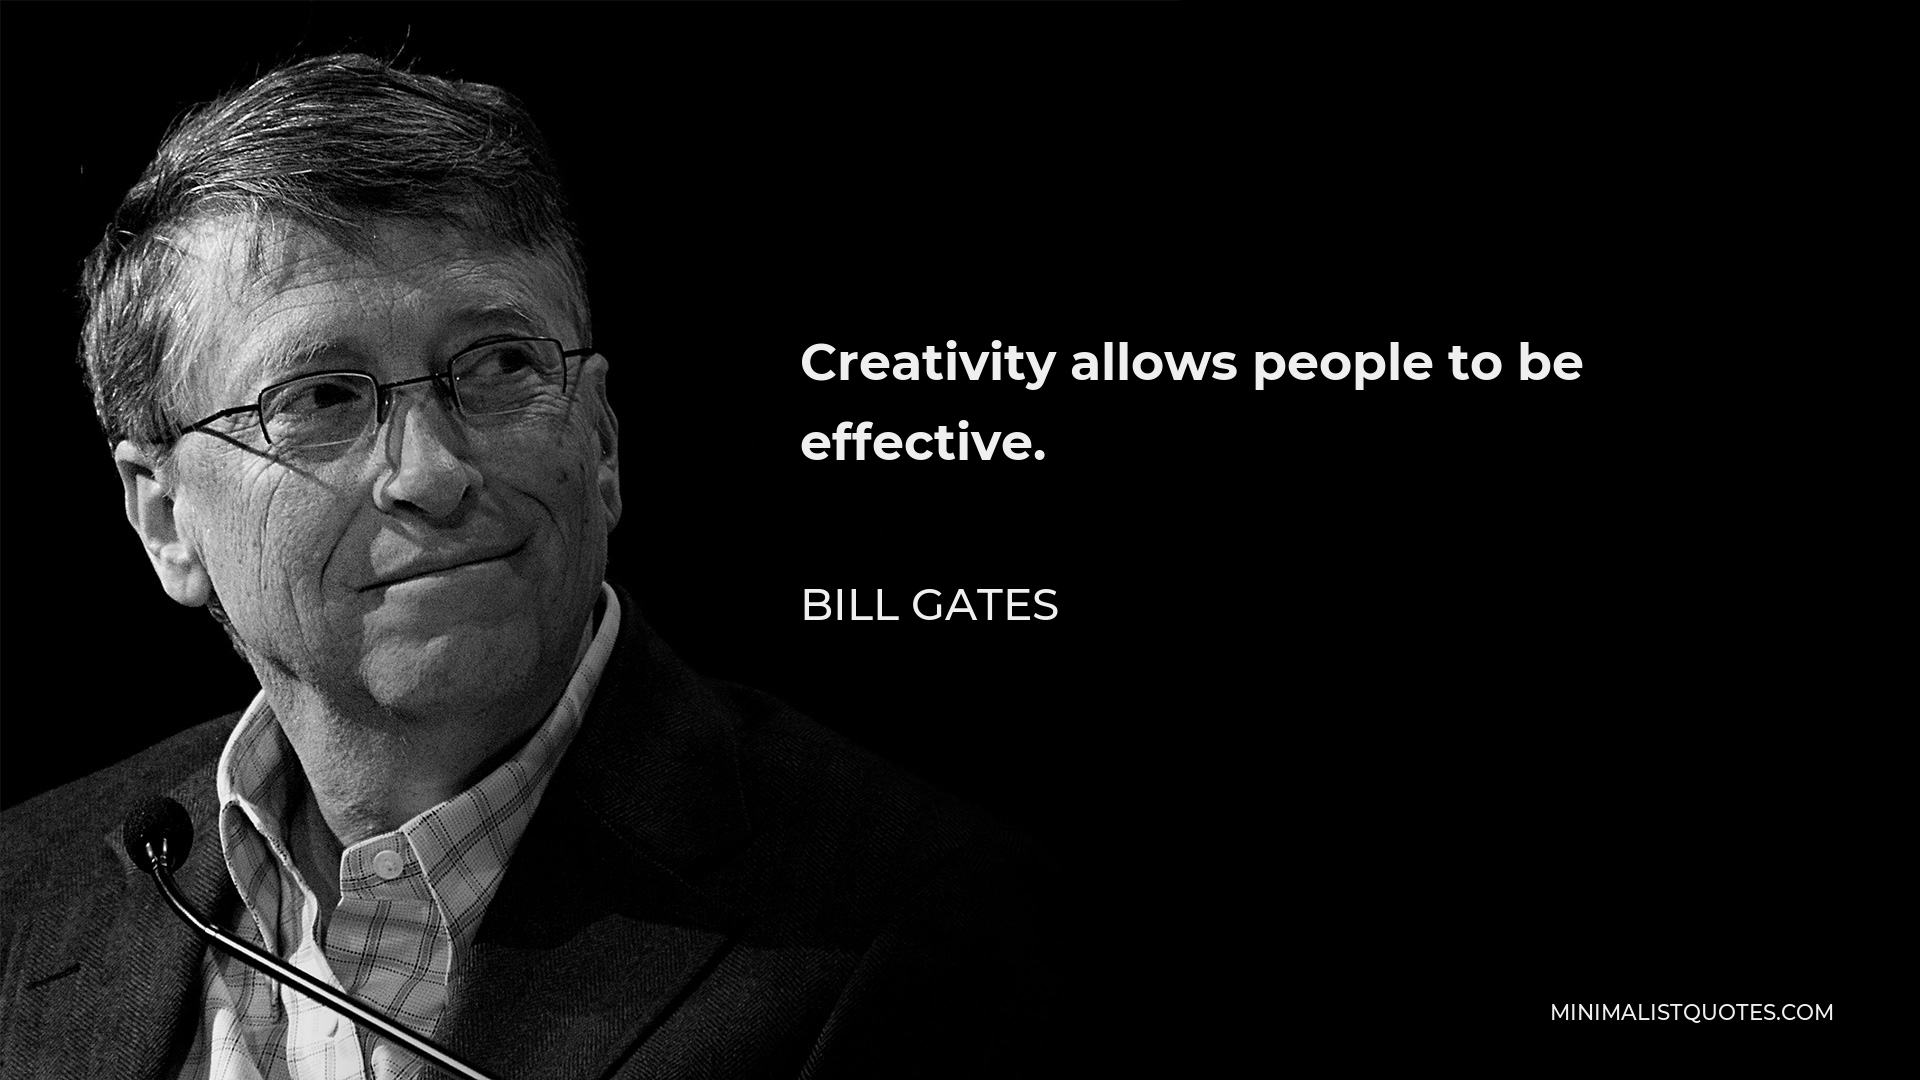 Bill Gates Quote - Creativity allows people to be effective.